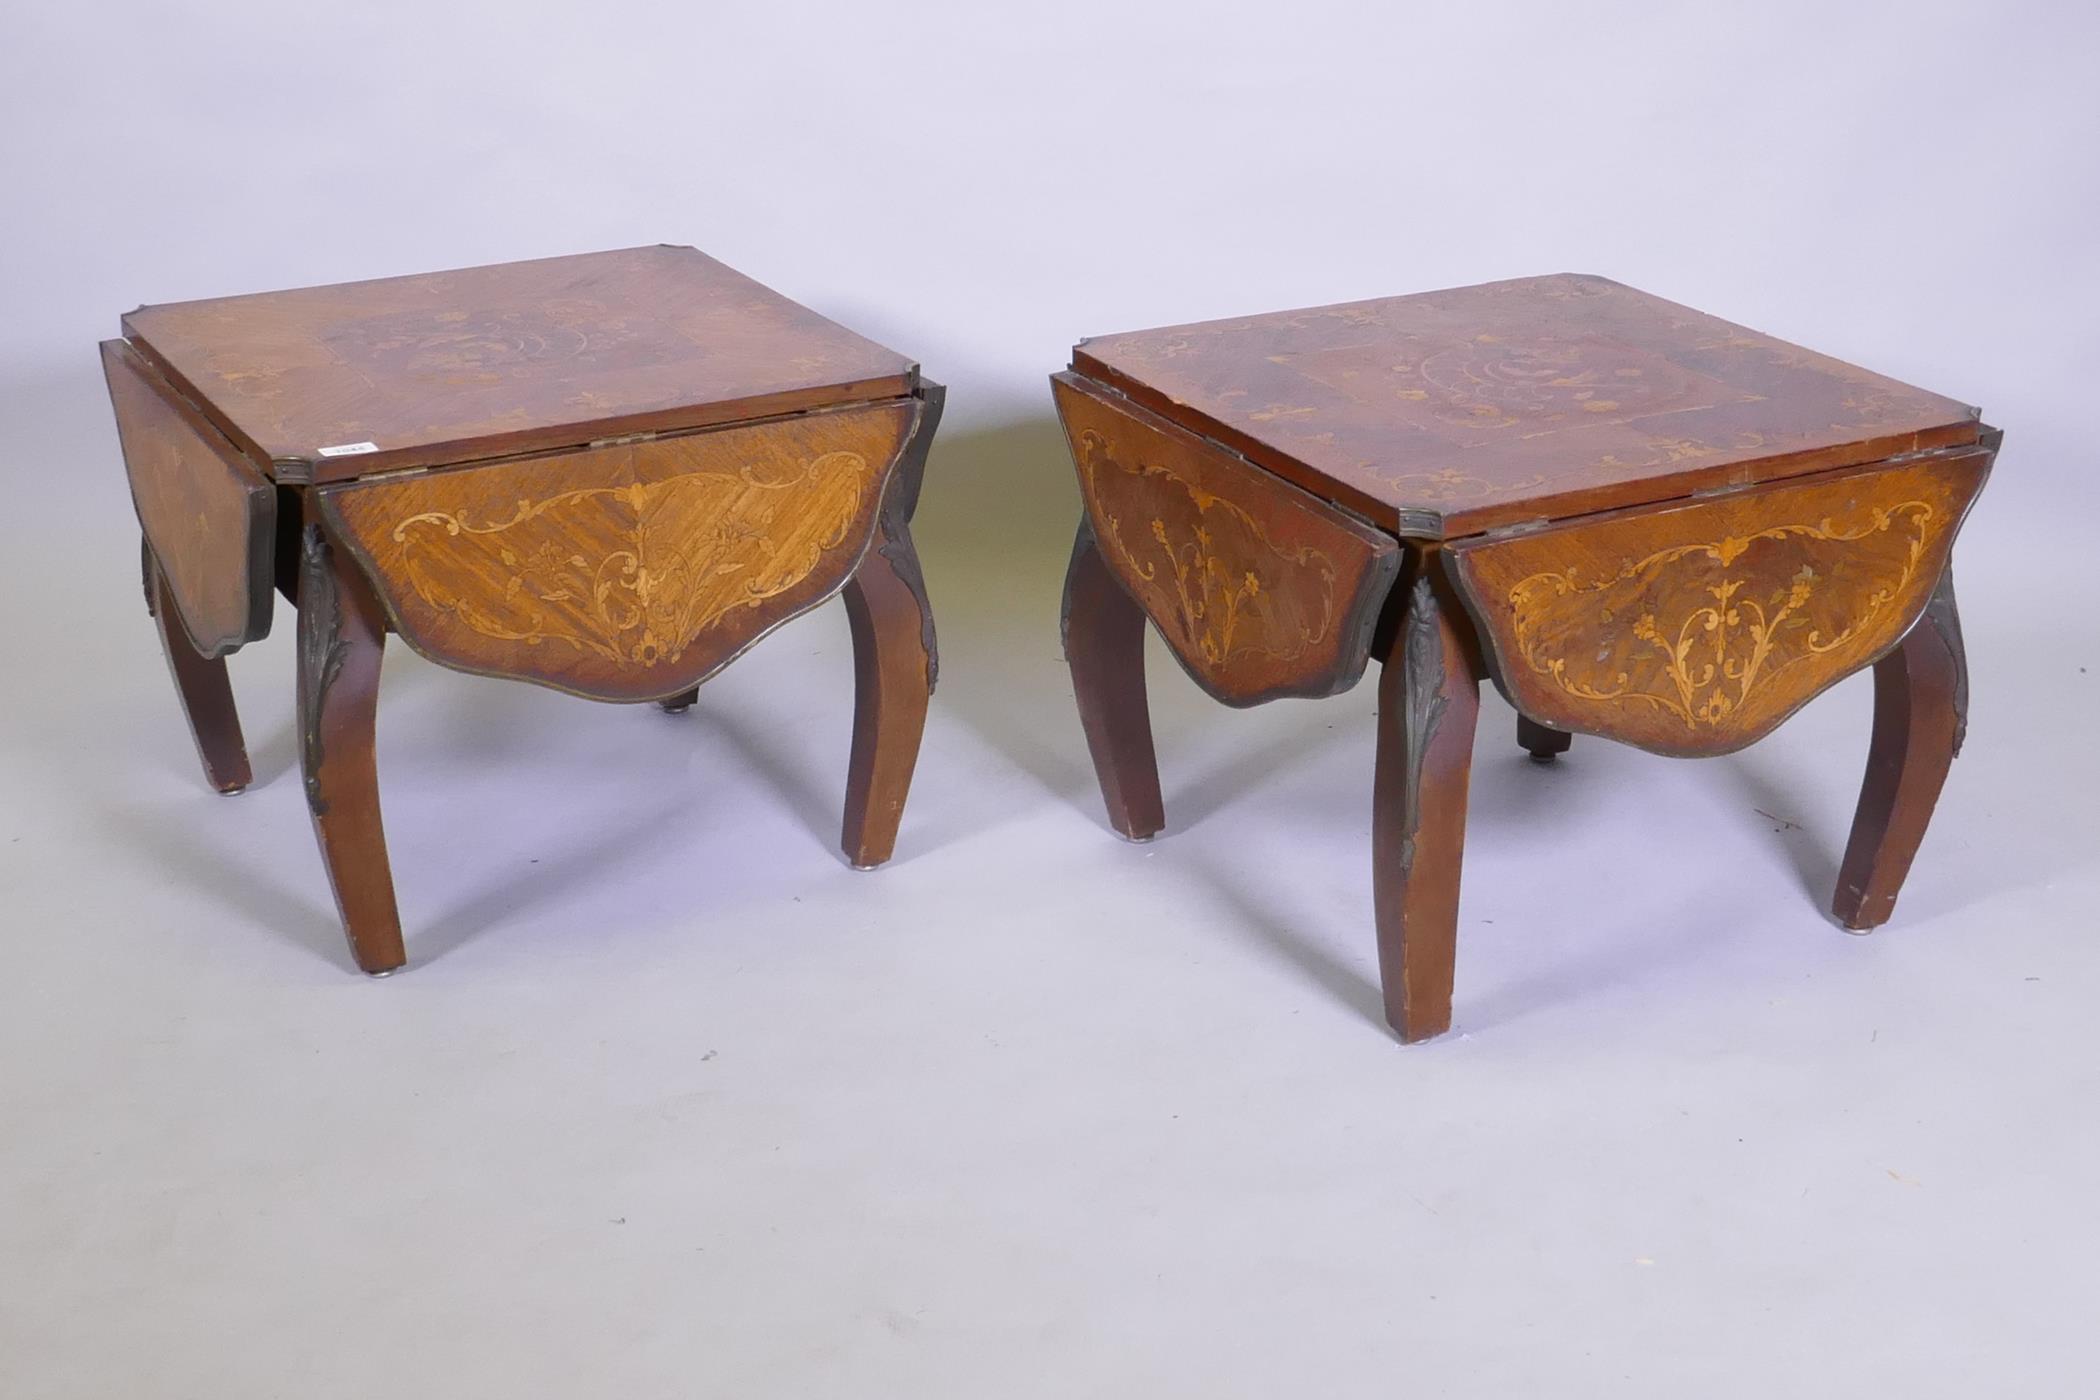 A pair of antique marquetry inlaid kingwood tables with a shaped top and ormolu mounts, reduced,